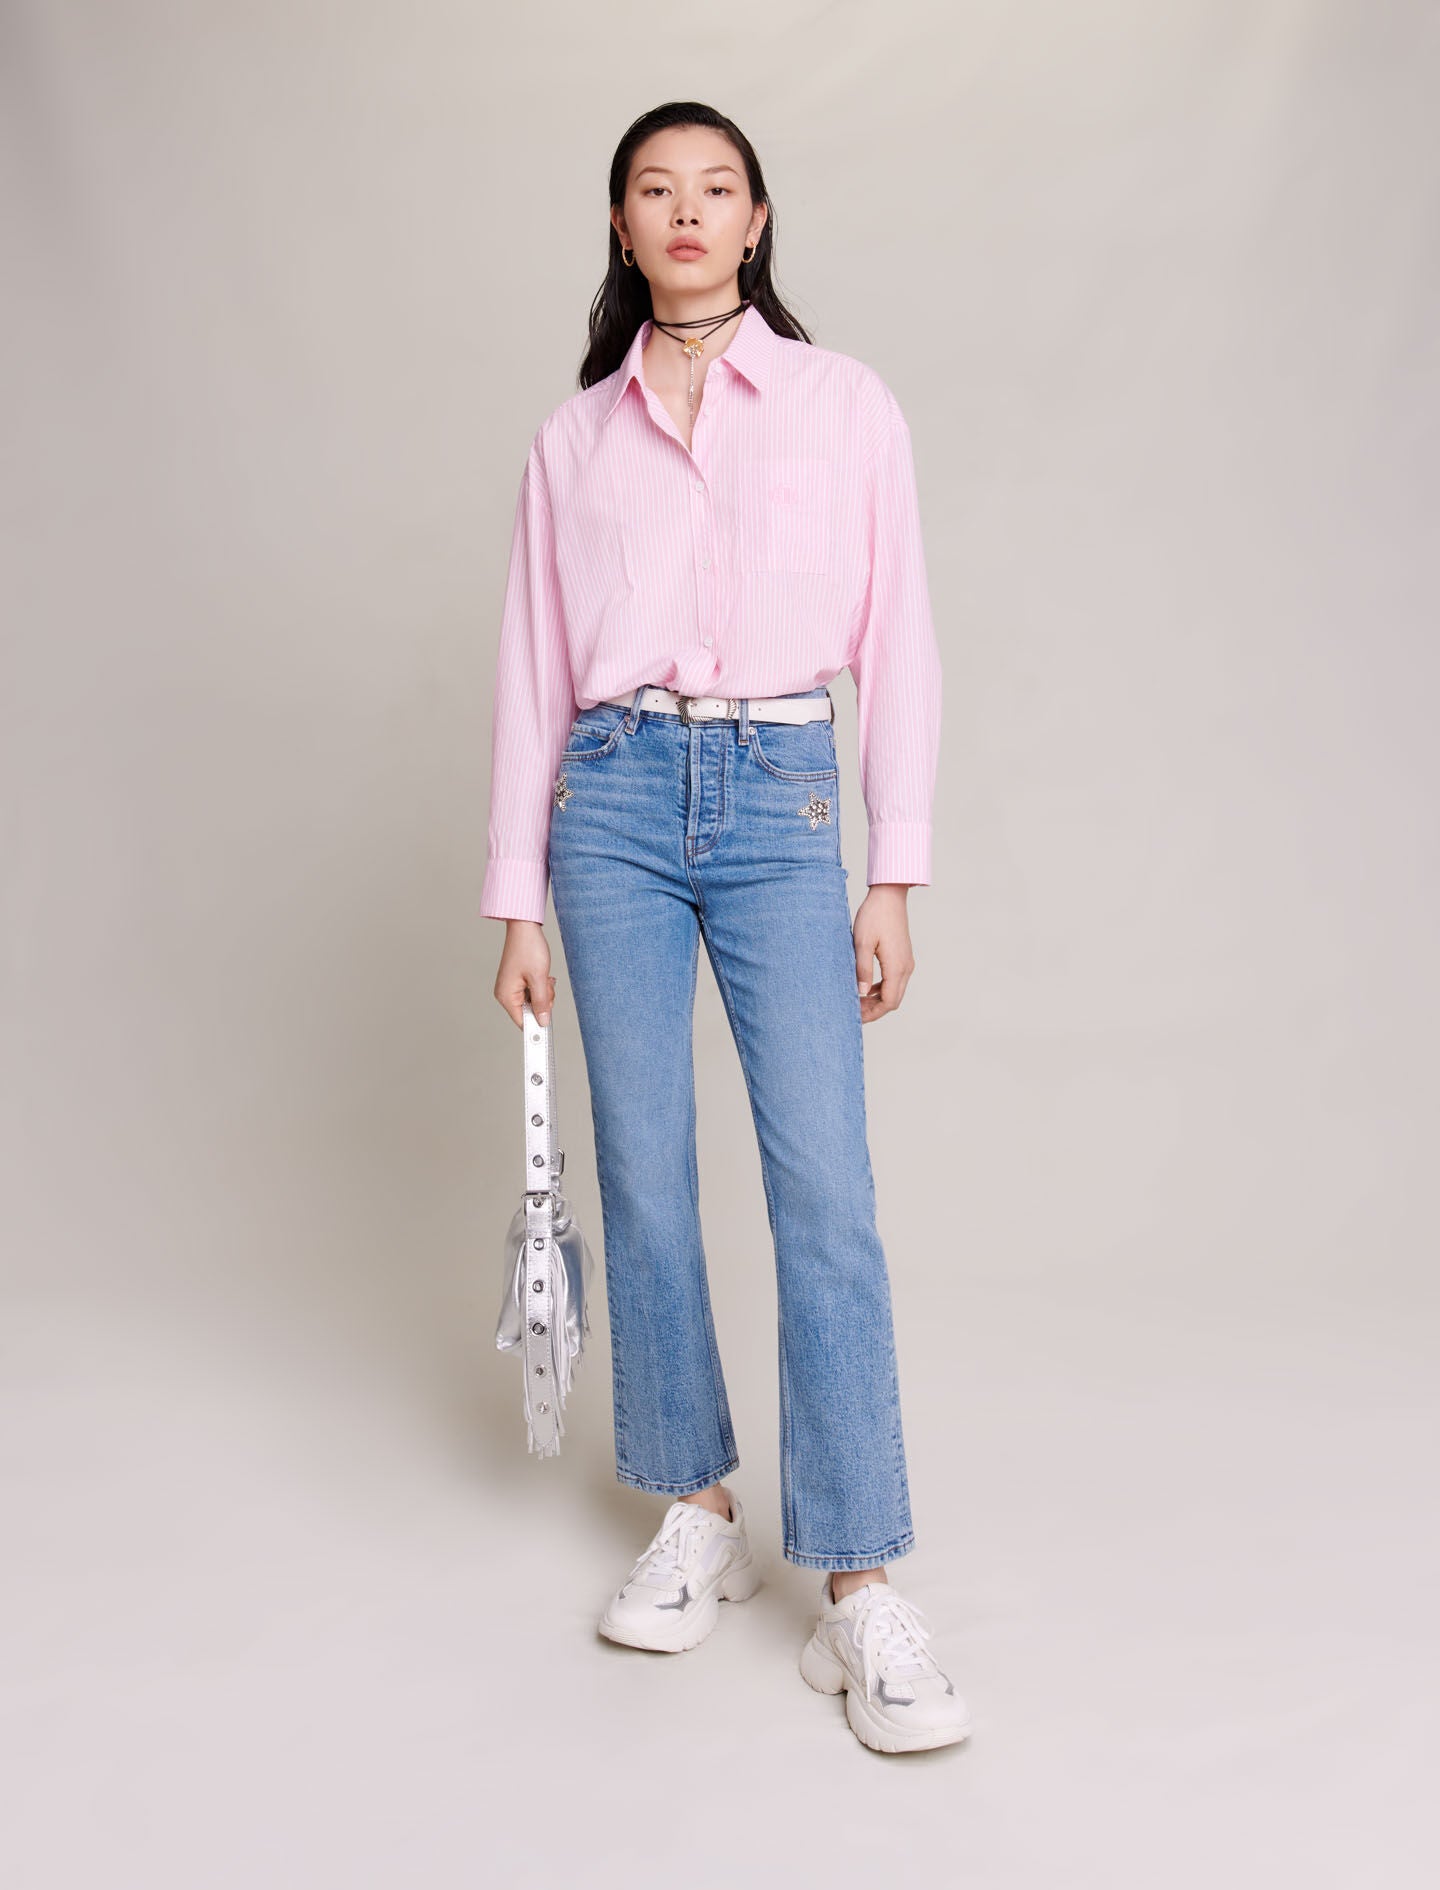 Pink-featured-striped shirt